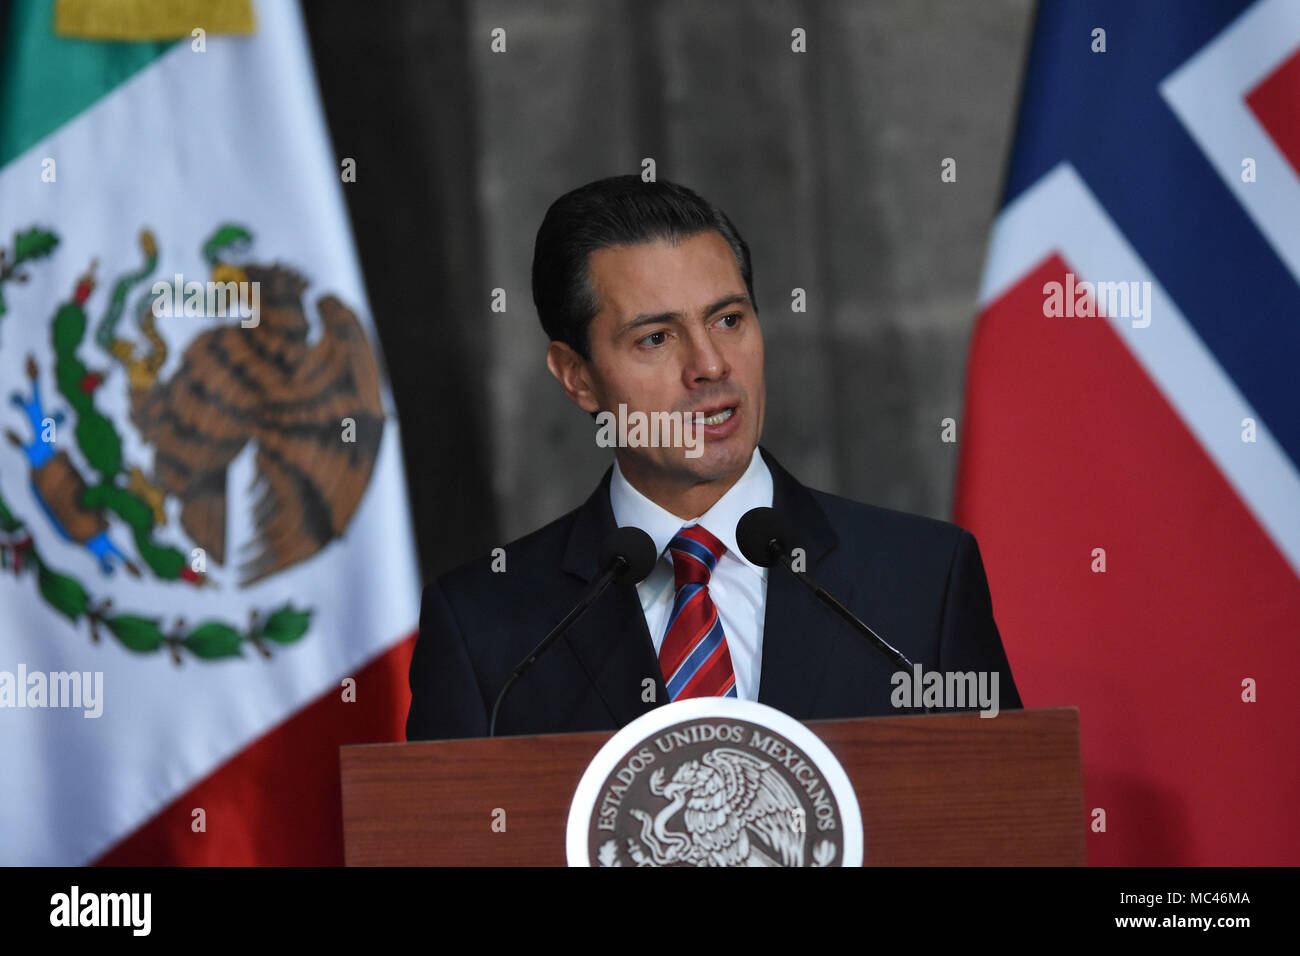 CIDADE DO MÉXICO, DF - 12.04.2018: VISITA OFICIAL DO PRIMEIRO MINISTRO DA NOR - Mexico&#39;s Prent ent Enrique Pena Nieto is speg at a meeting at the Nationtional Palace on April 12, 2018 in Mexico City, Mexico. The reason for the working visit of Erna Solberg is to focus on the theme of Energy (Photo: Carlos Tischler/Fotoarena) Stock Photo